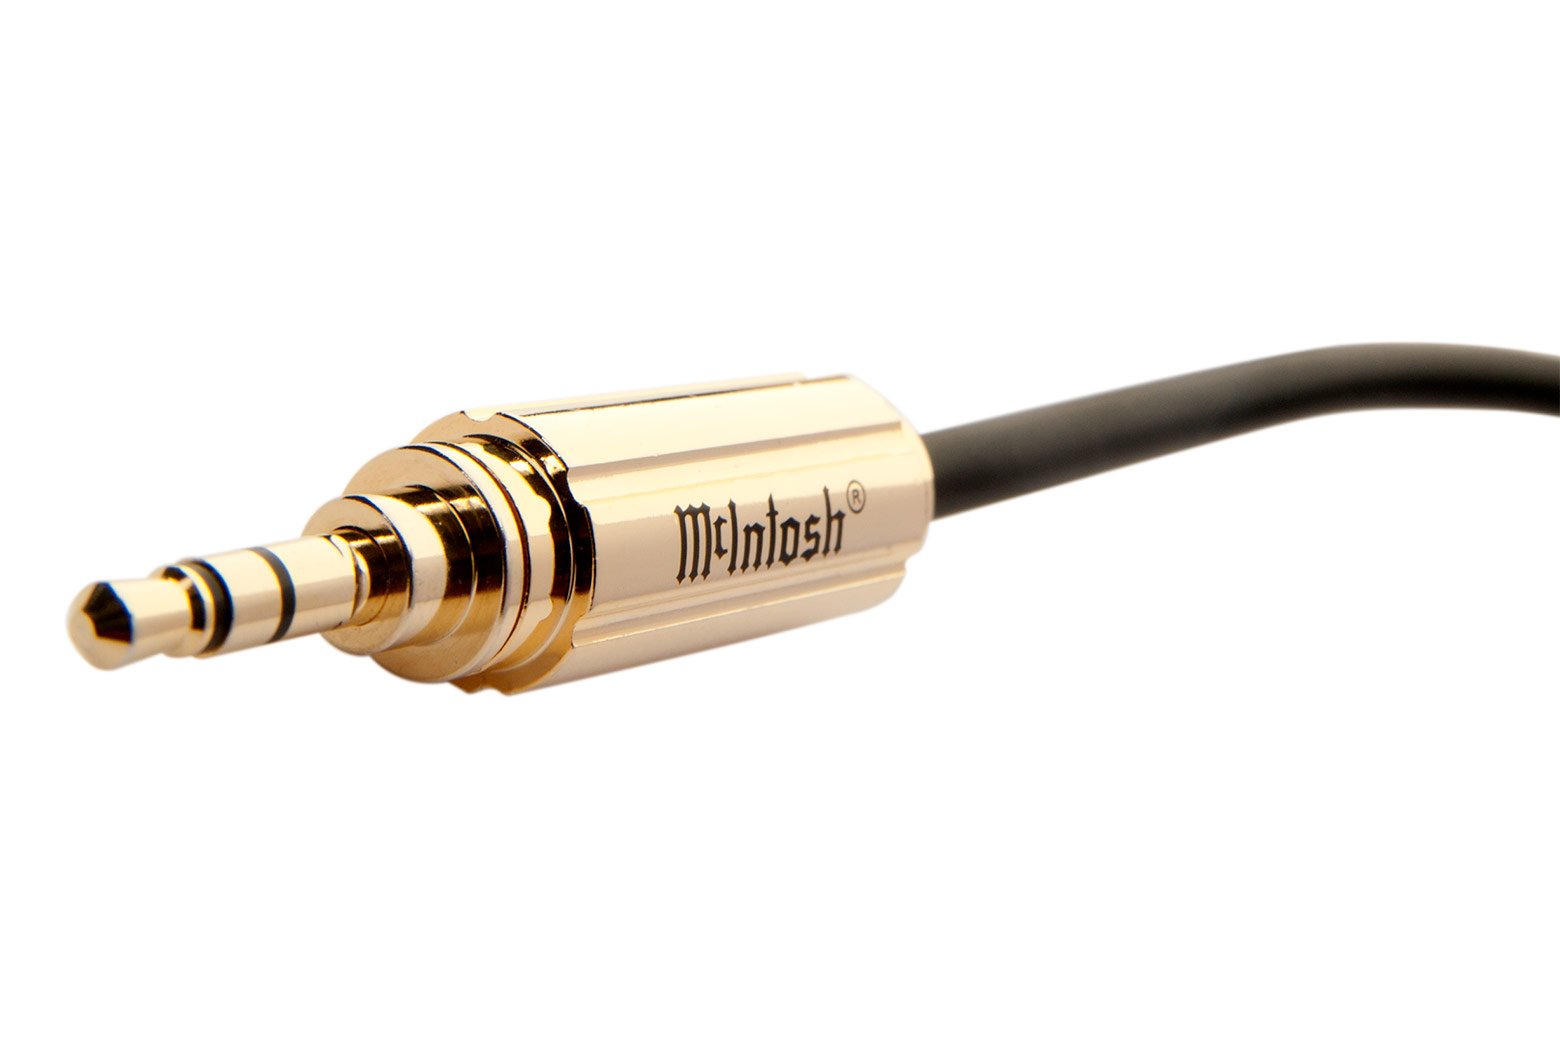 McIntosh Power Control Cables - Sold as a Single (In-Store Purchases Only)